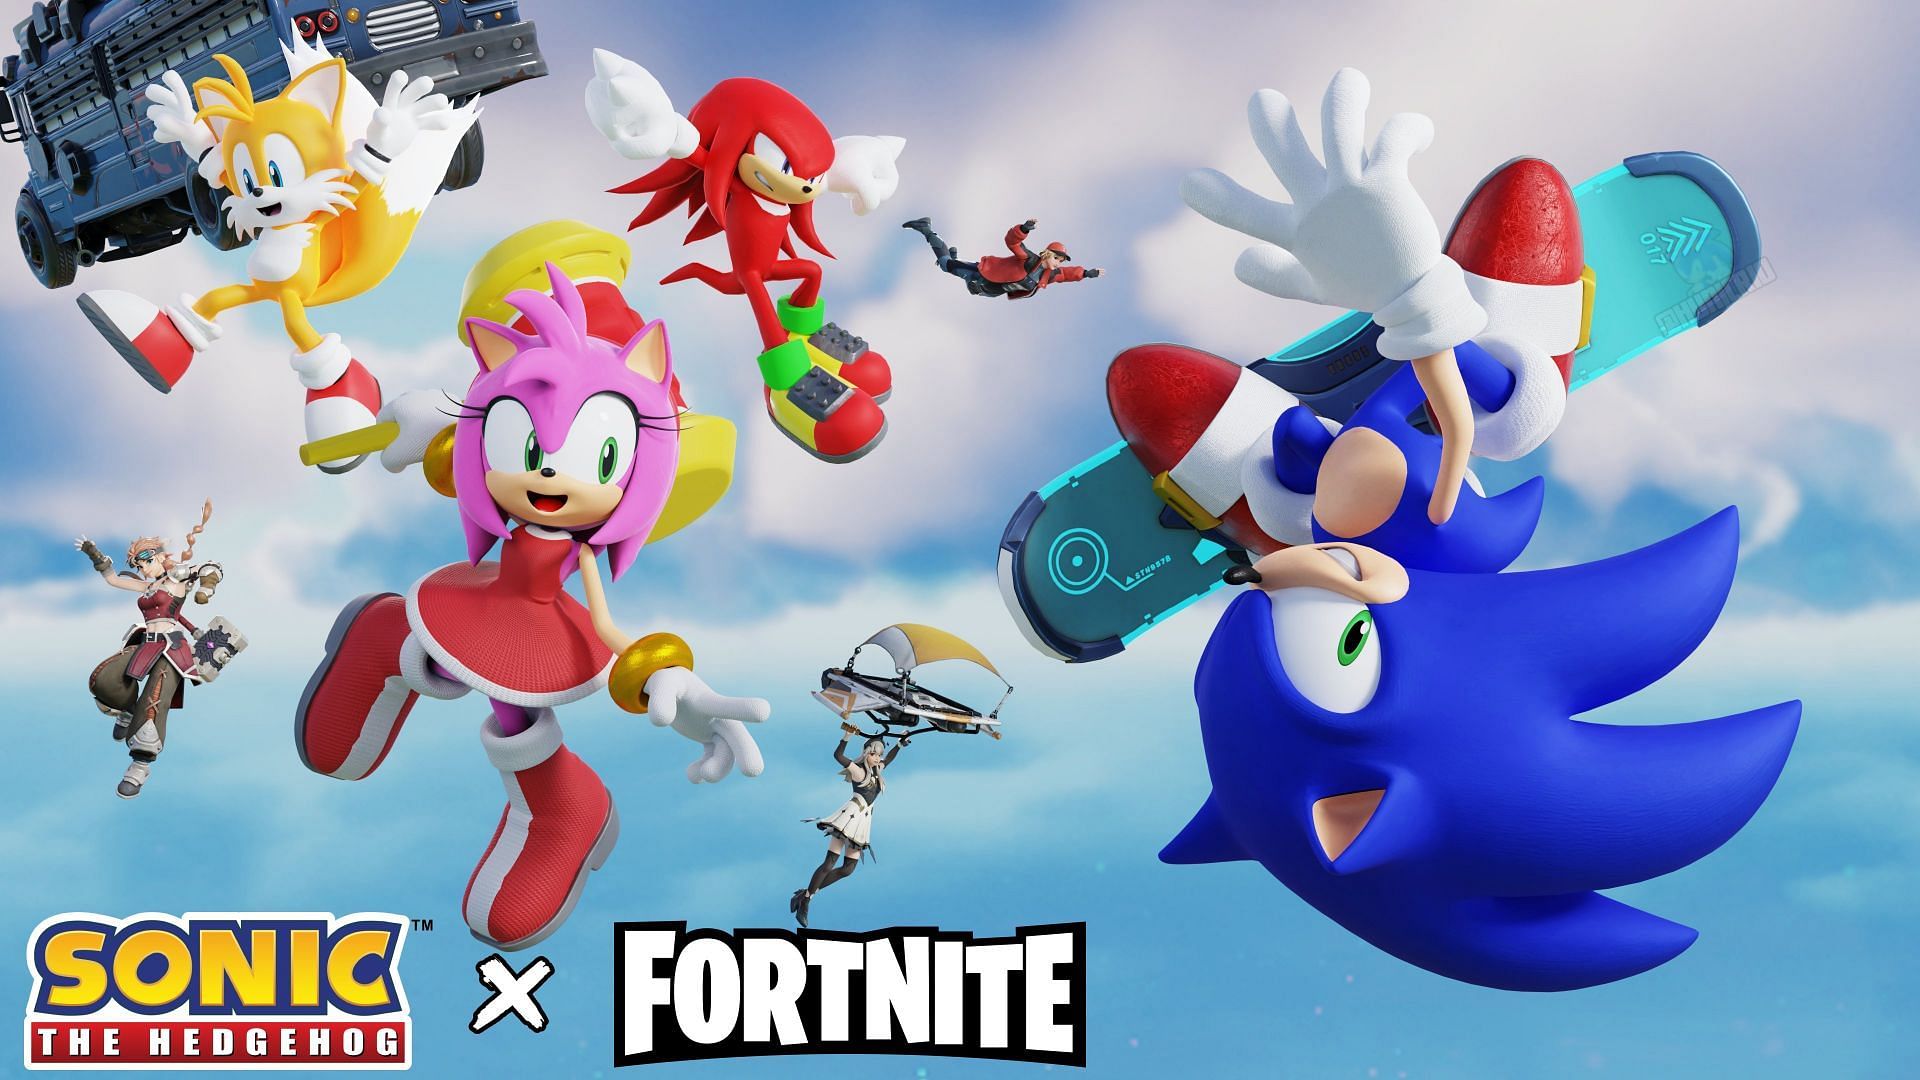 Fortnite x Sonic is not happening anytime soon (Image via Twitter/hunicrio)